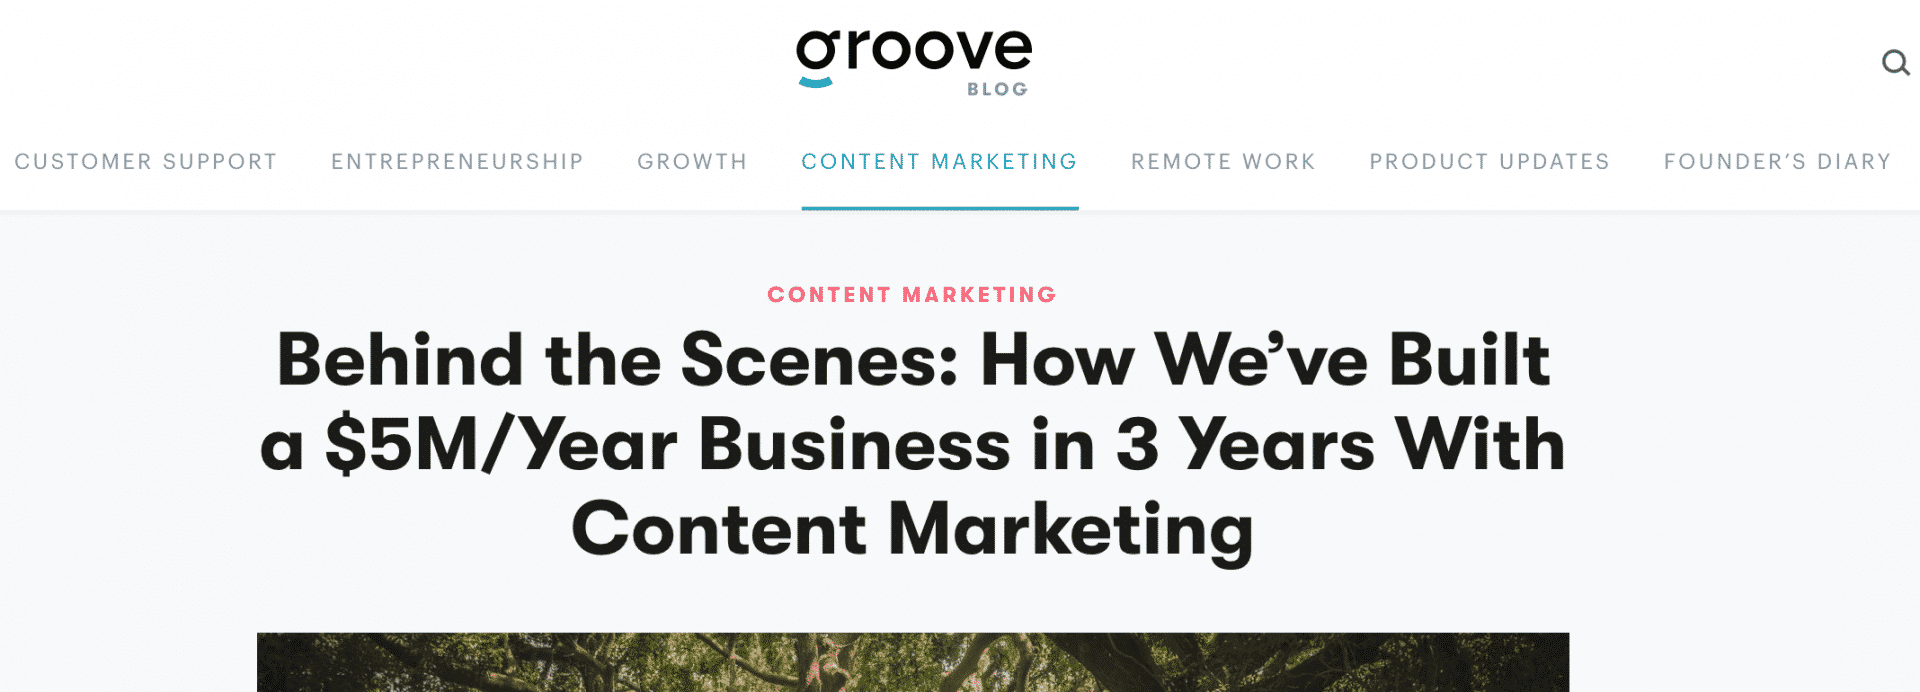 Groove's SaaS marketing through content